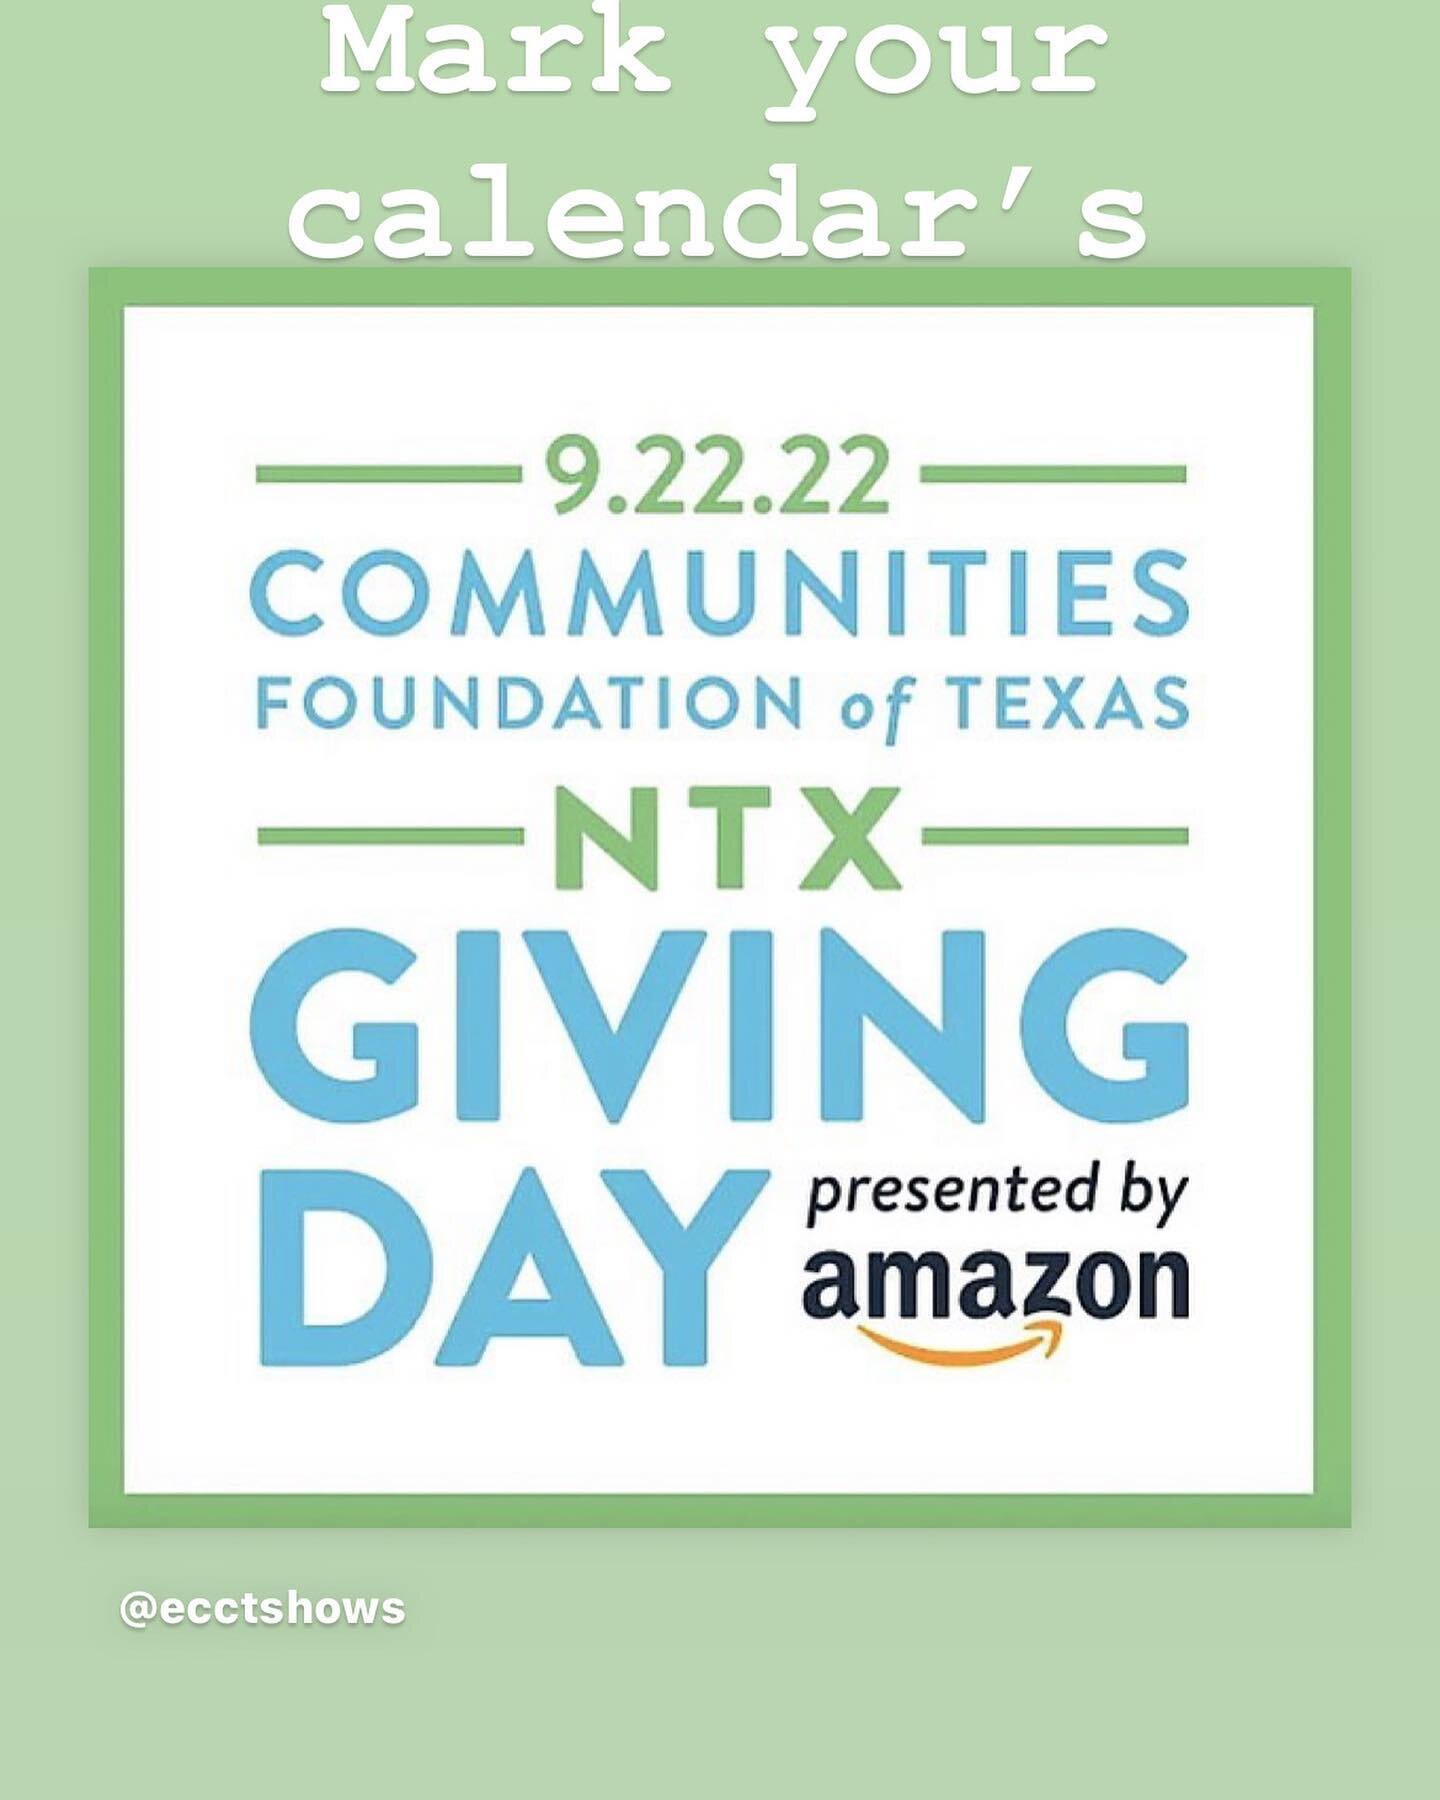 Let&rsquo;s give to ECCT so we can continue to impact Children&rsquo;s lives!!!!
#childrentheater #ntxgivingday